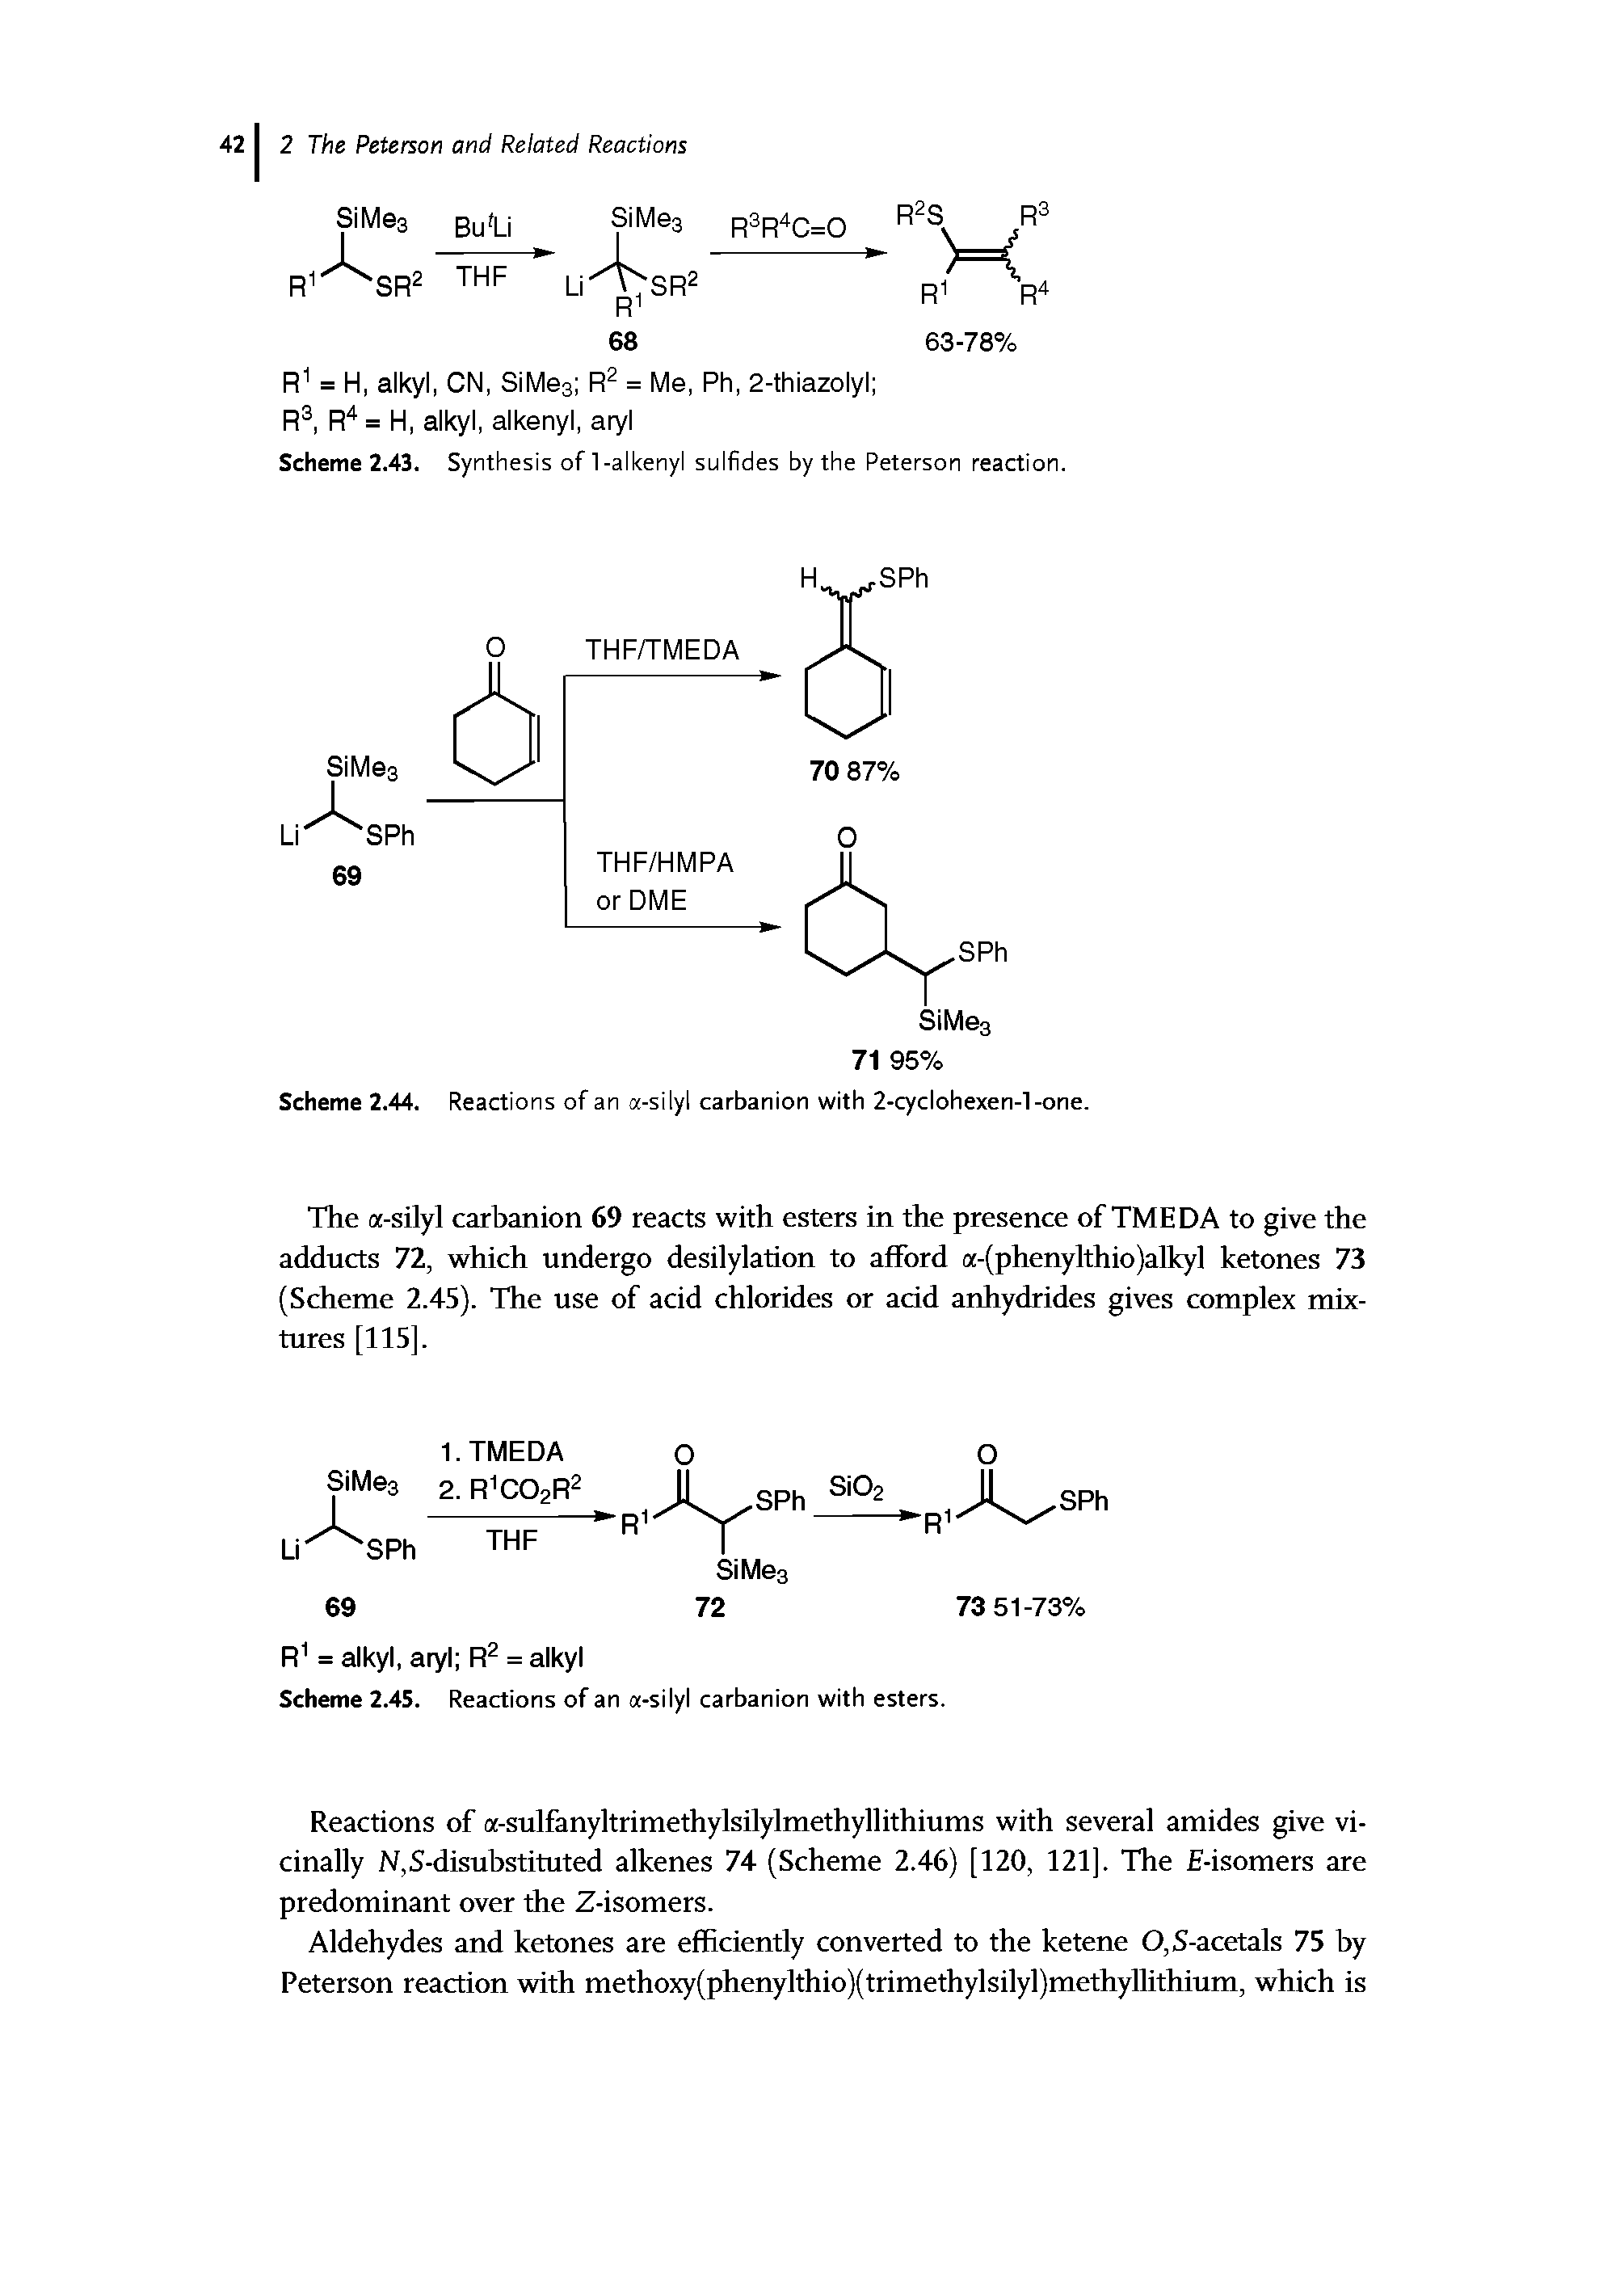 Scheme 2.43. Synthesis of 1-alkenyl sulfides by the Peterson reaction.